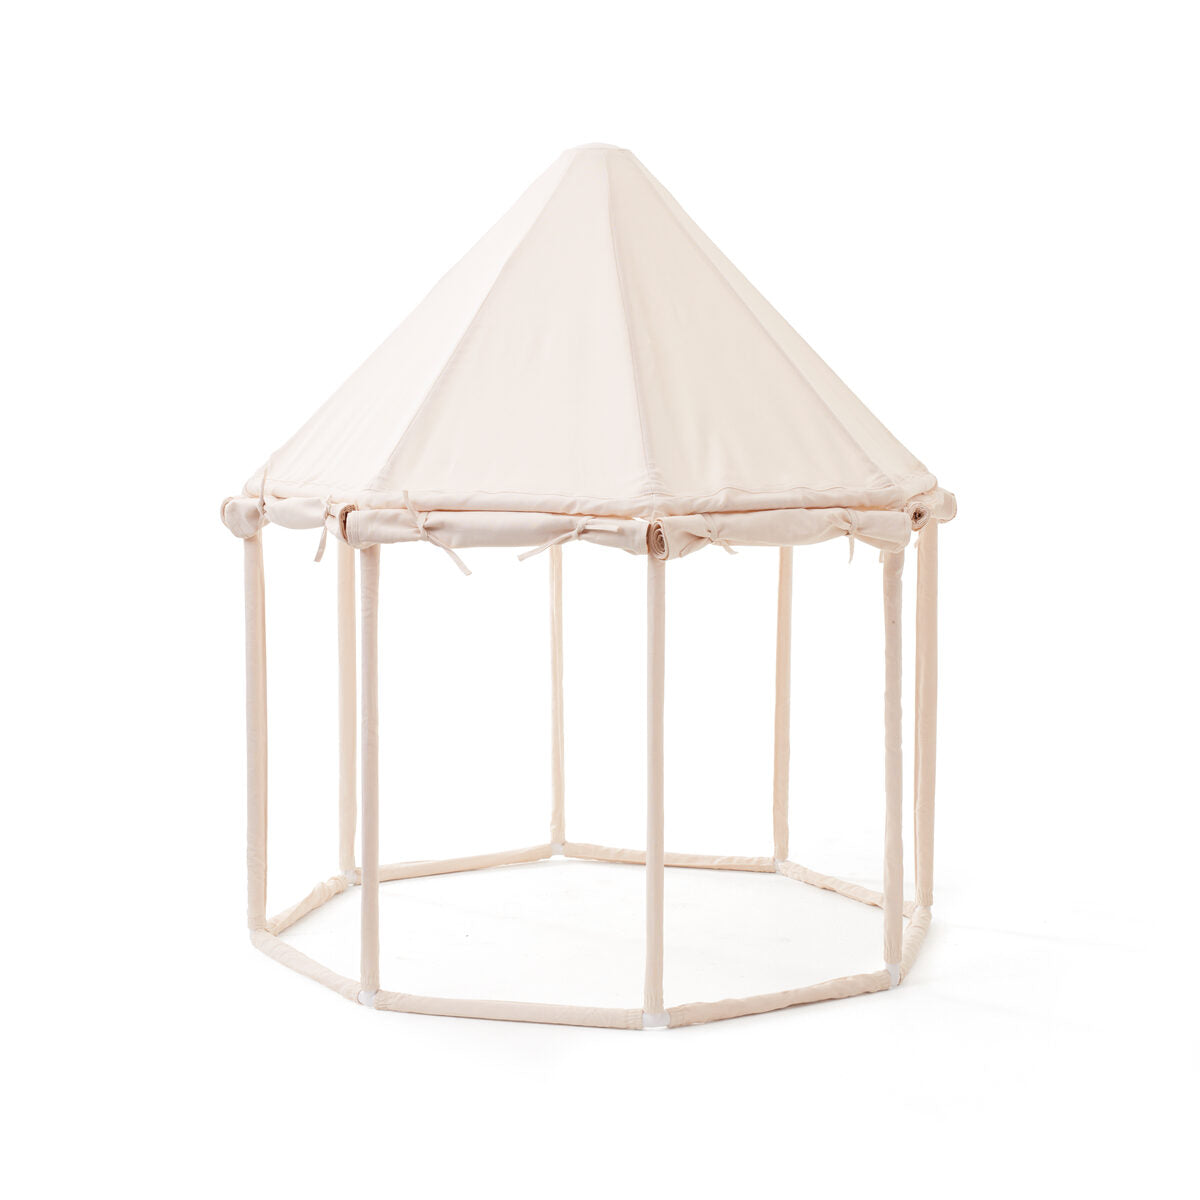 Kids Concept Pavilion Tent (up to 10 years) - Off White